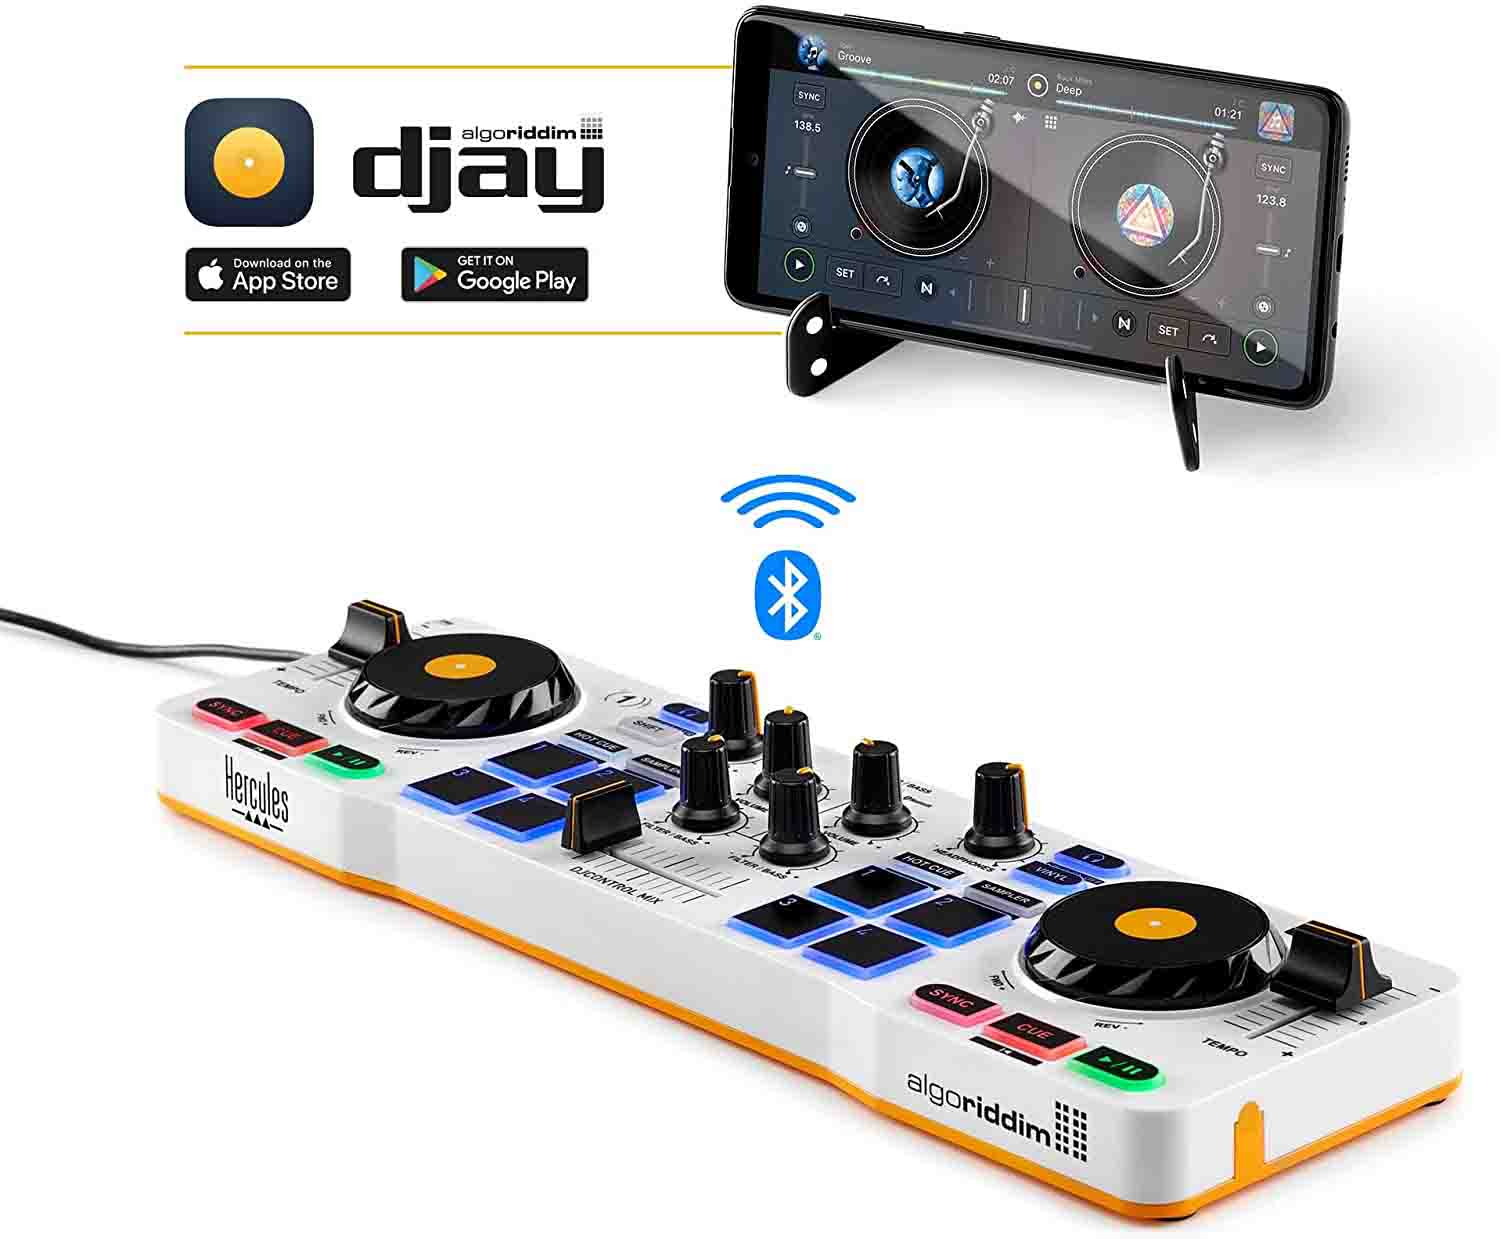 Hercules DJCONTROL MIX for Android and iOS Smartphones with Algoriddim djay App - Hollywood DJ